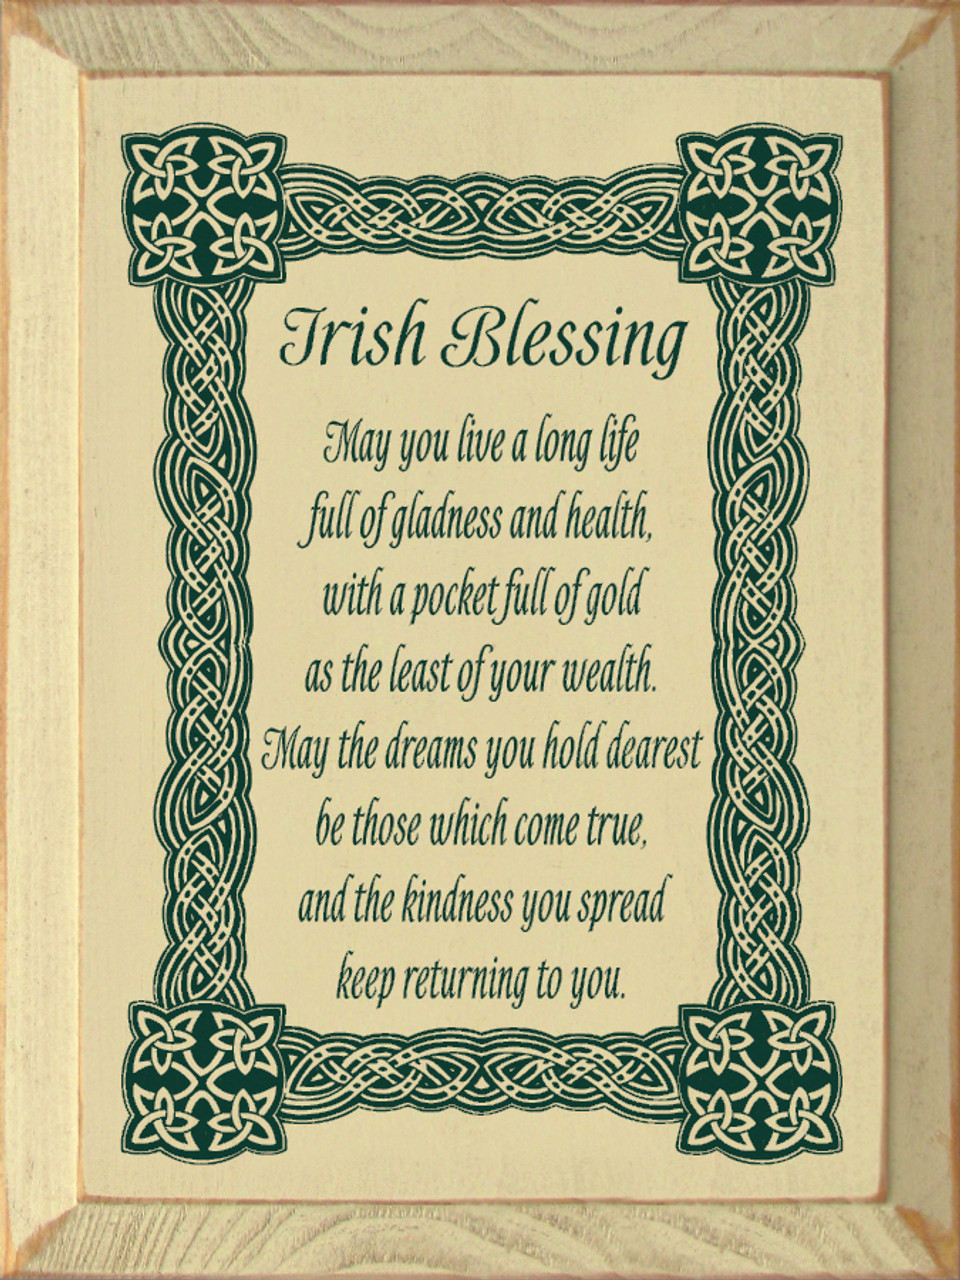 irish-blessing-may-you-live-a-long-life-full-of-gladness-and-health